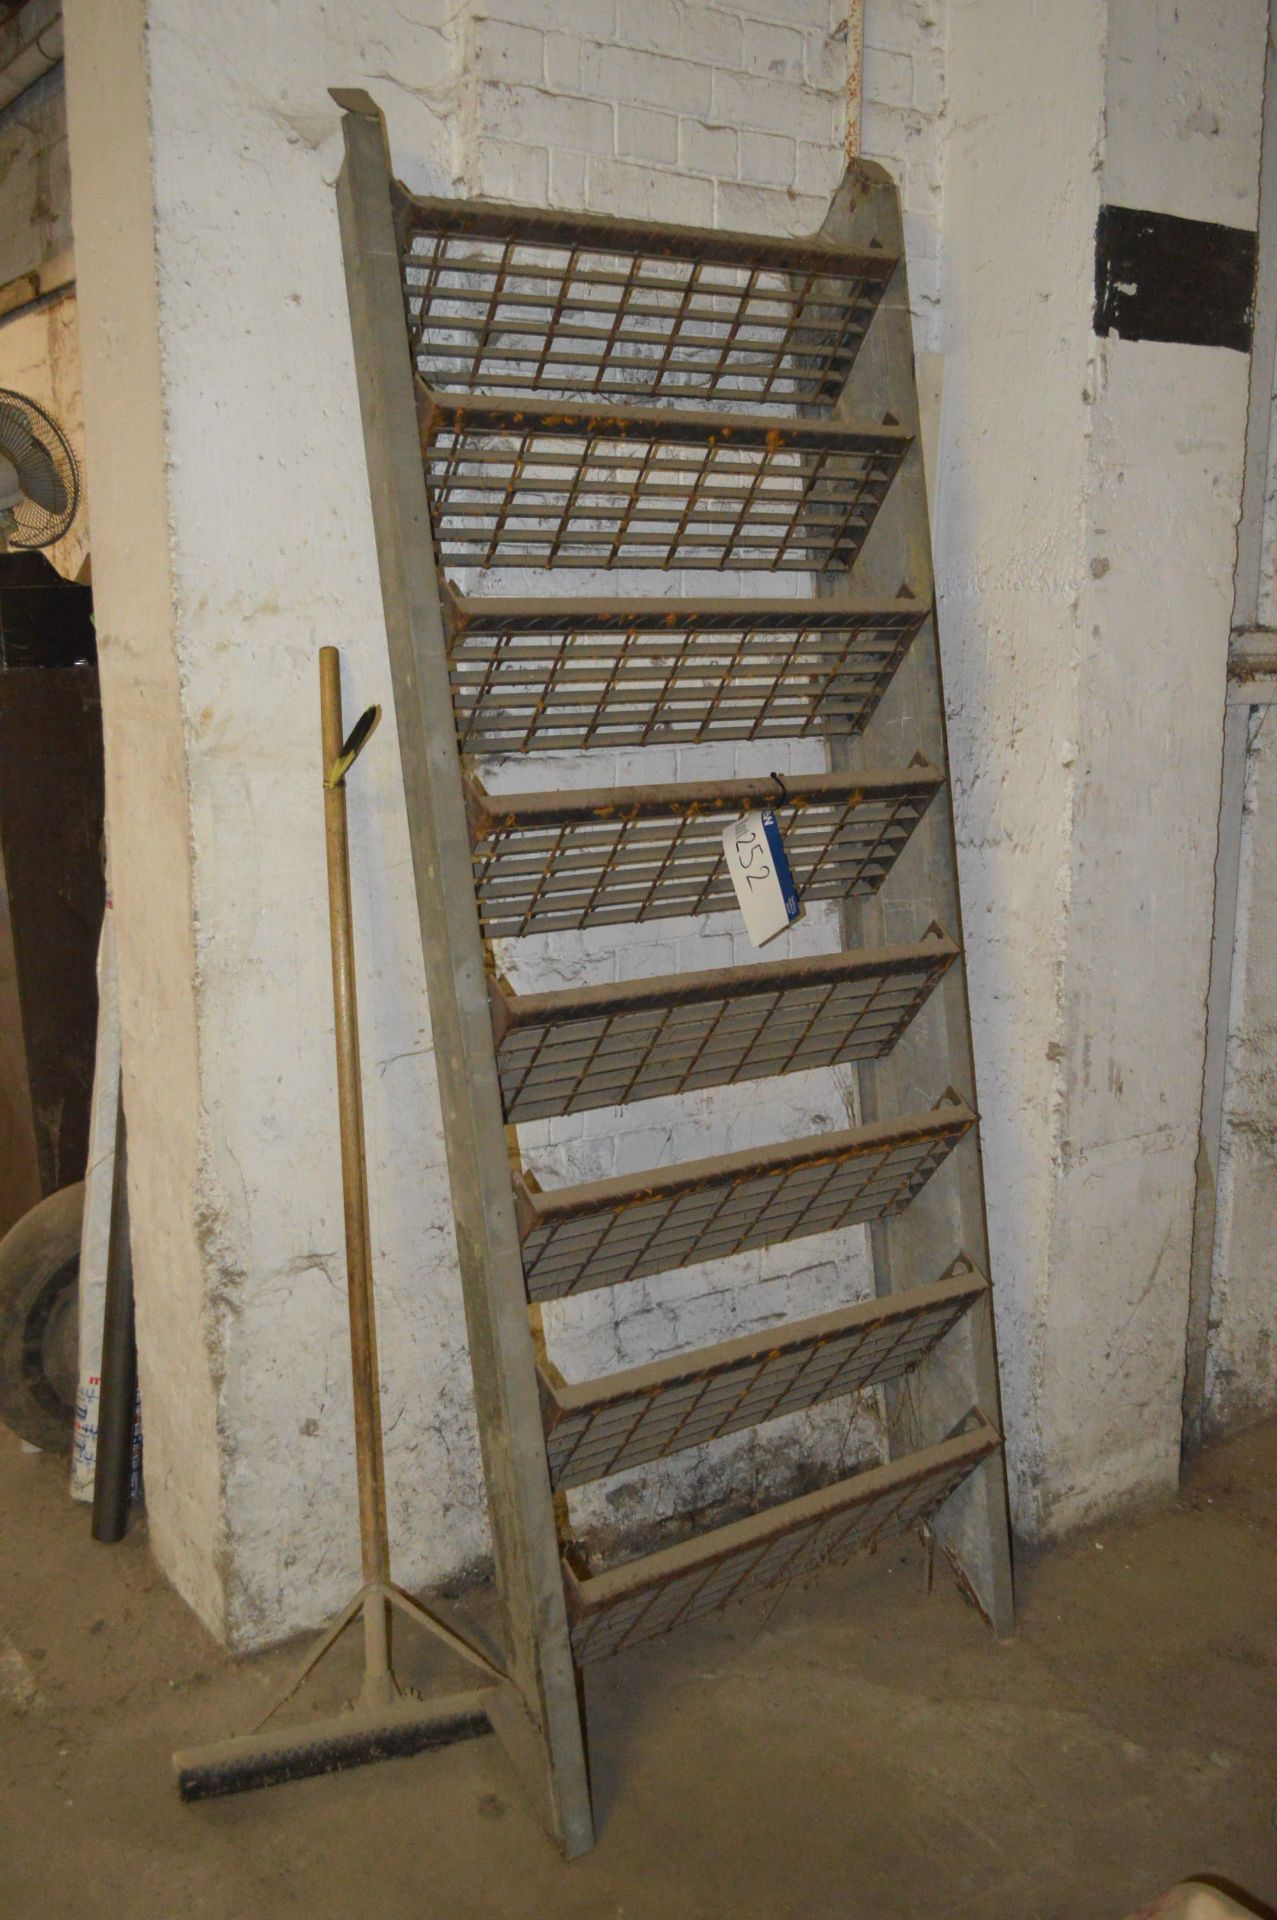 Eight Tread Staircase (no handrail) - Image 2 of 2